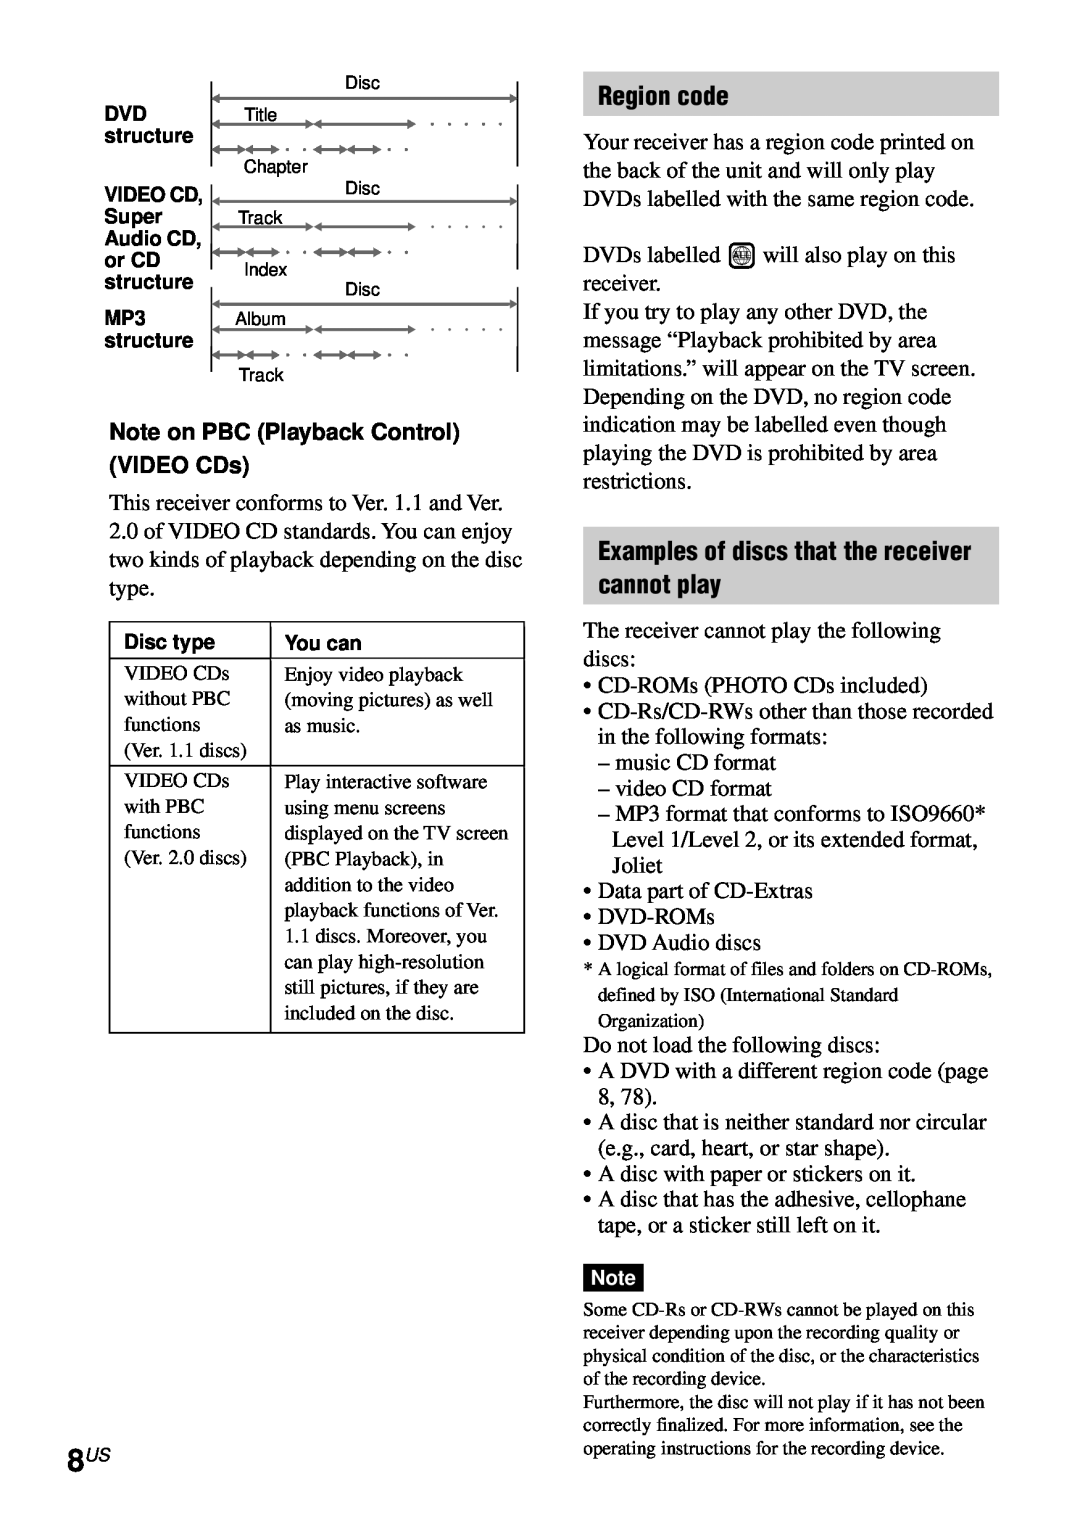 Sony AVD-S50ES Region code, Examples of discs that the receiver cannot play, Note on PBC Playback Control VIDEO CDs 